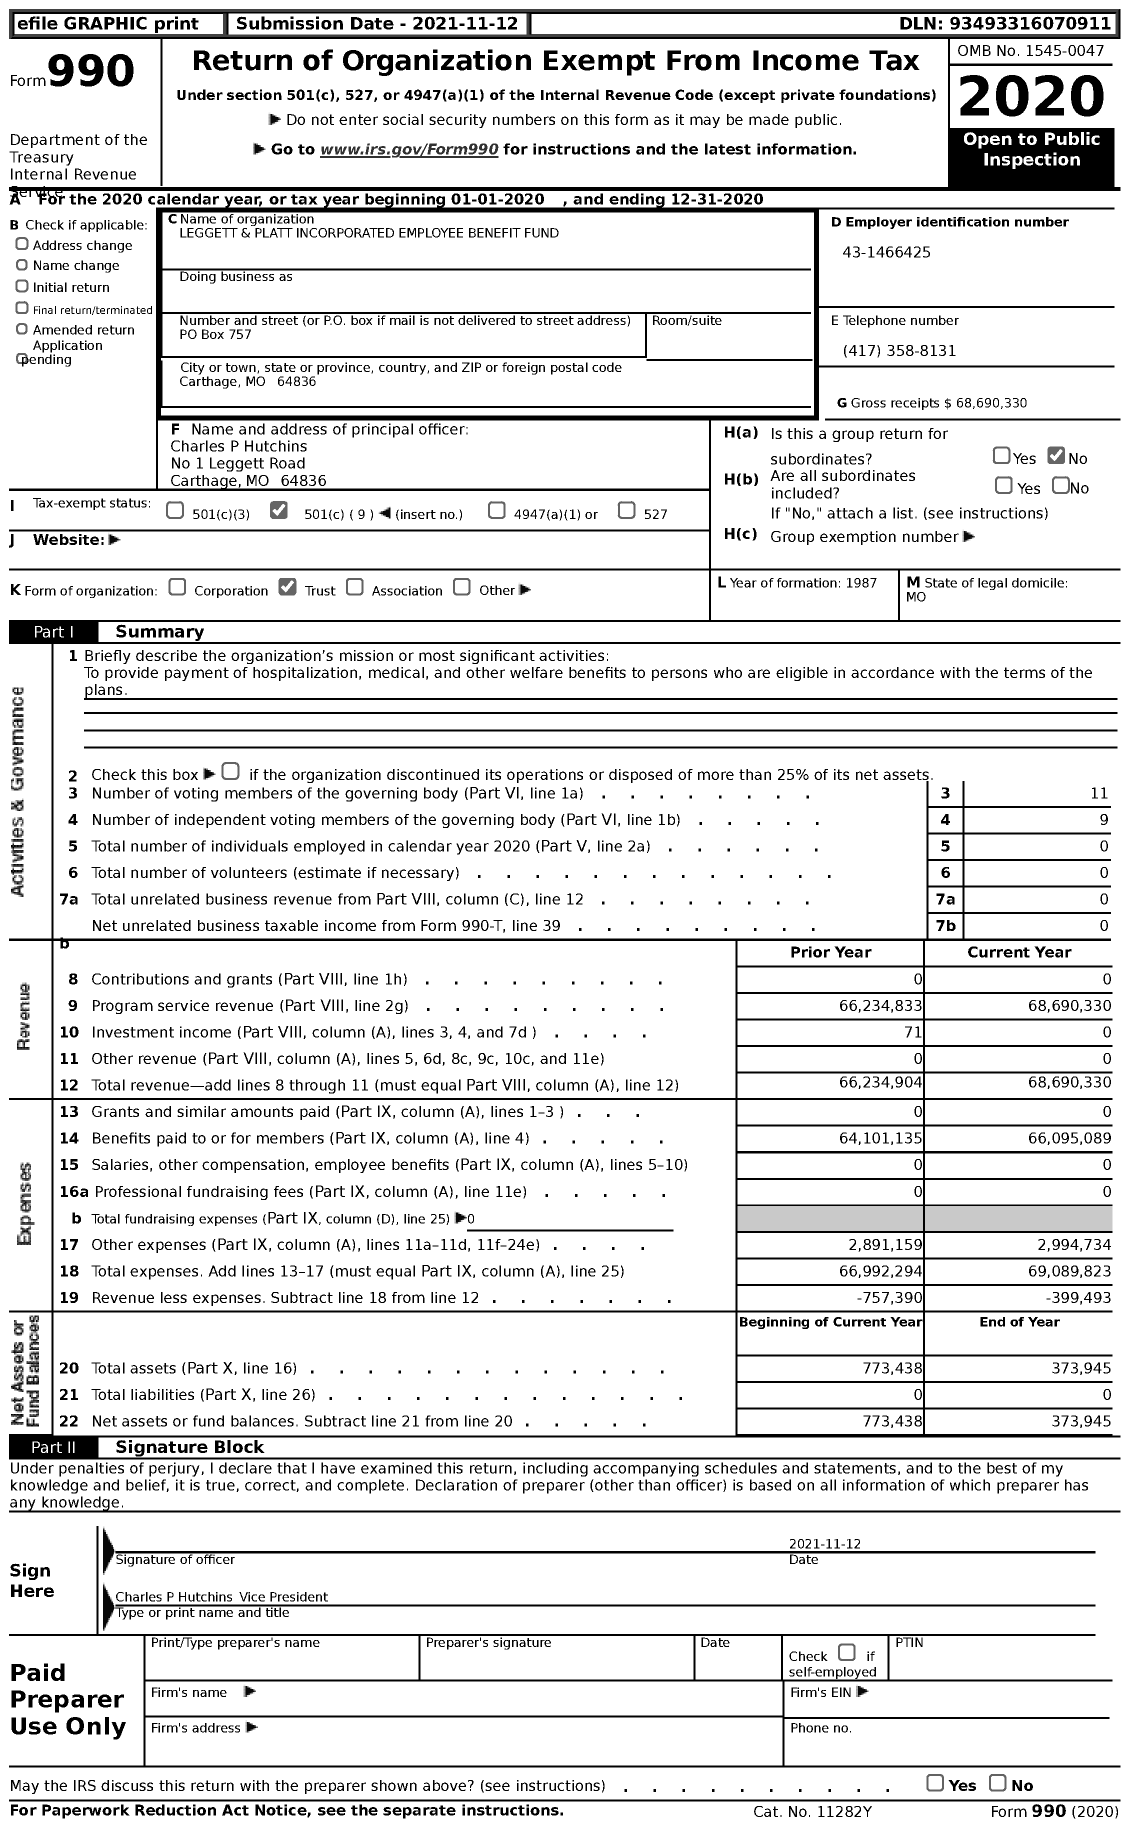 Image of first page of 2020 Form 990 for Leggett and Platt Incorporated Employee Benefit Fund